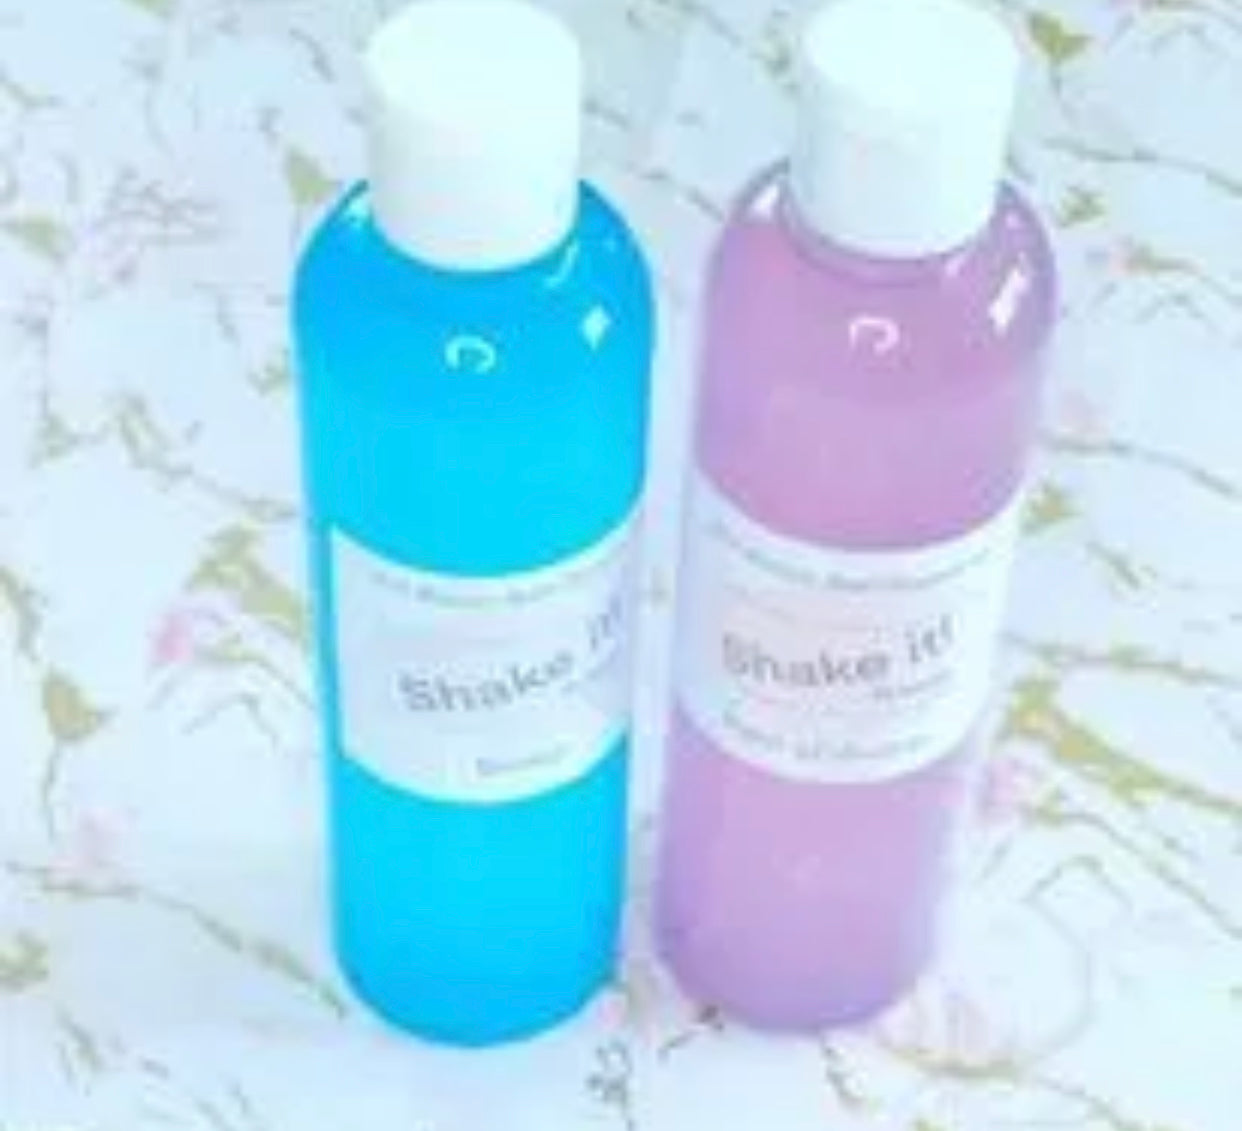 2 in 1 bubble bath and shower gel